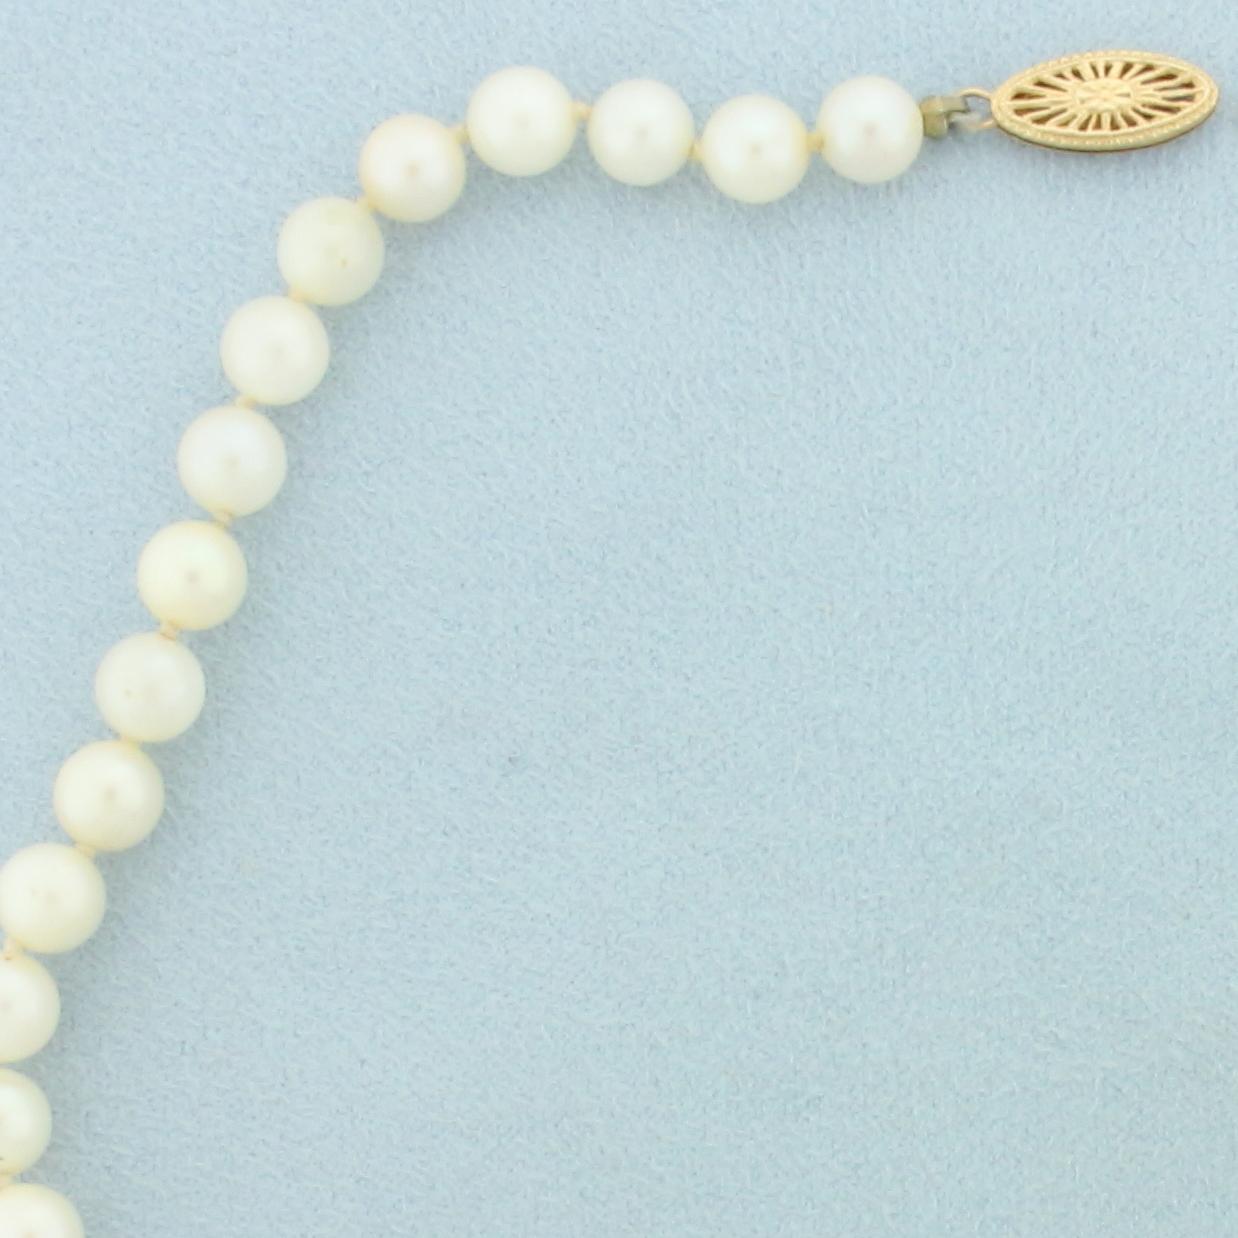 Vintage 16 Inch Cultured Akoya Pearl Necklace In 14k Yellow Gold